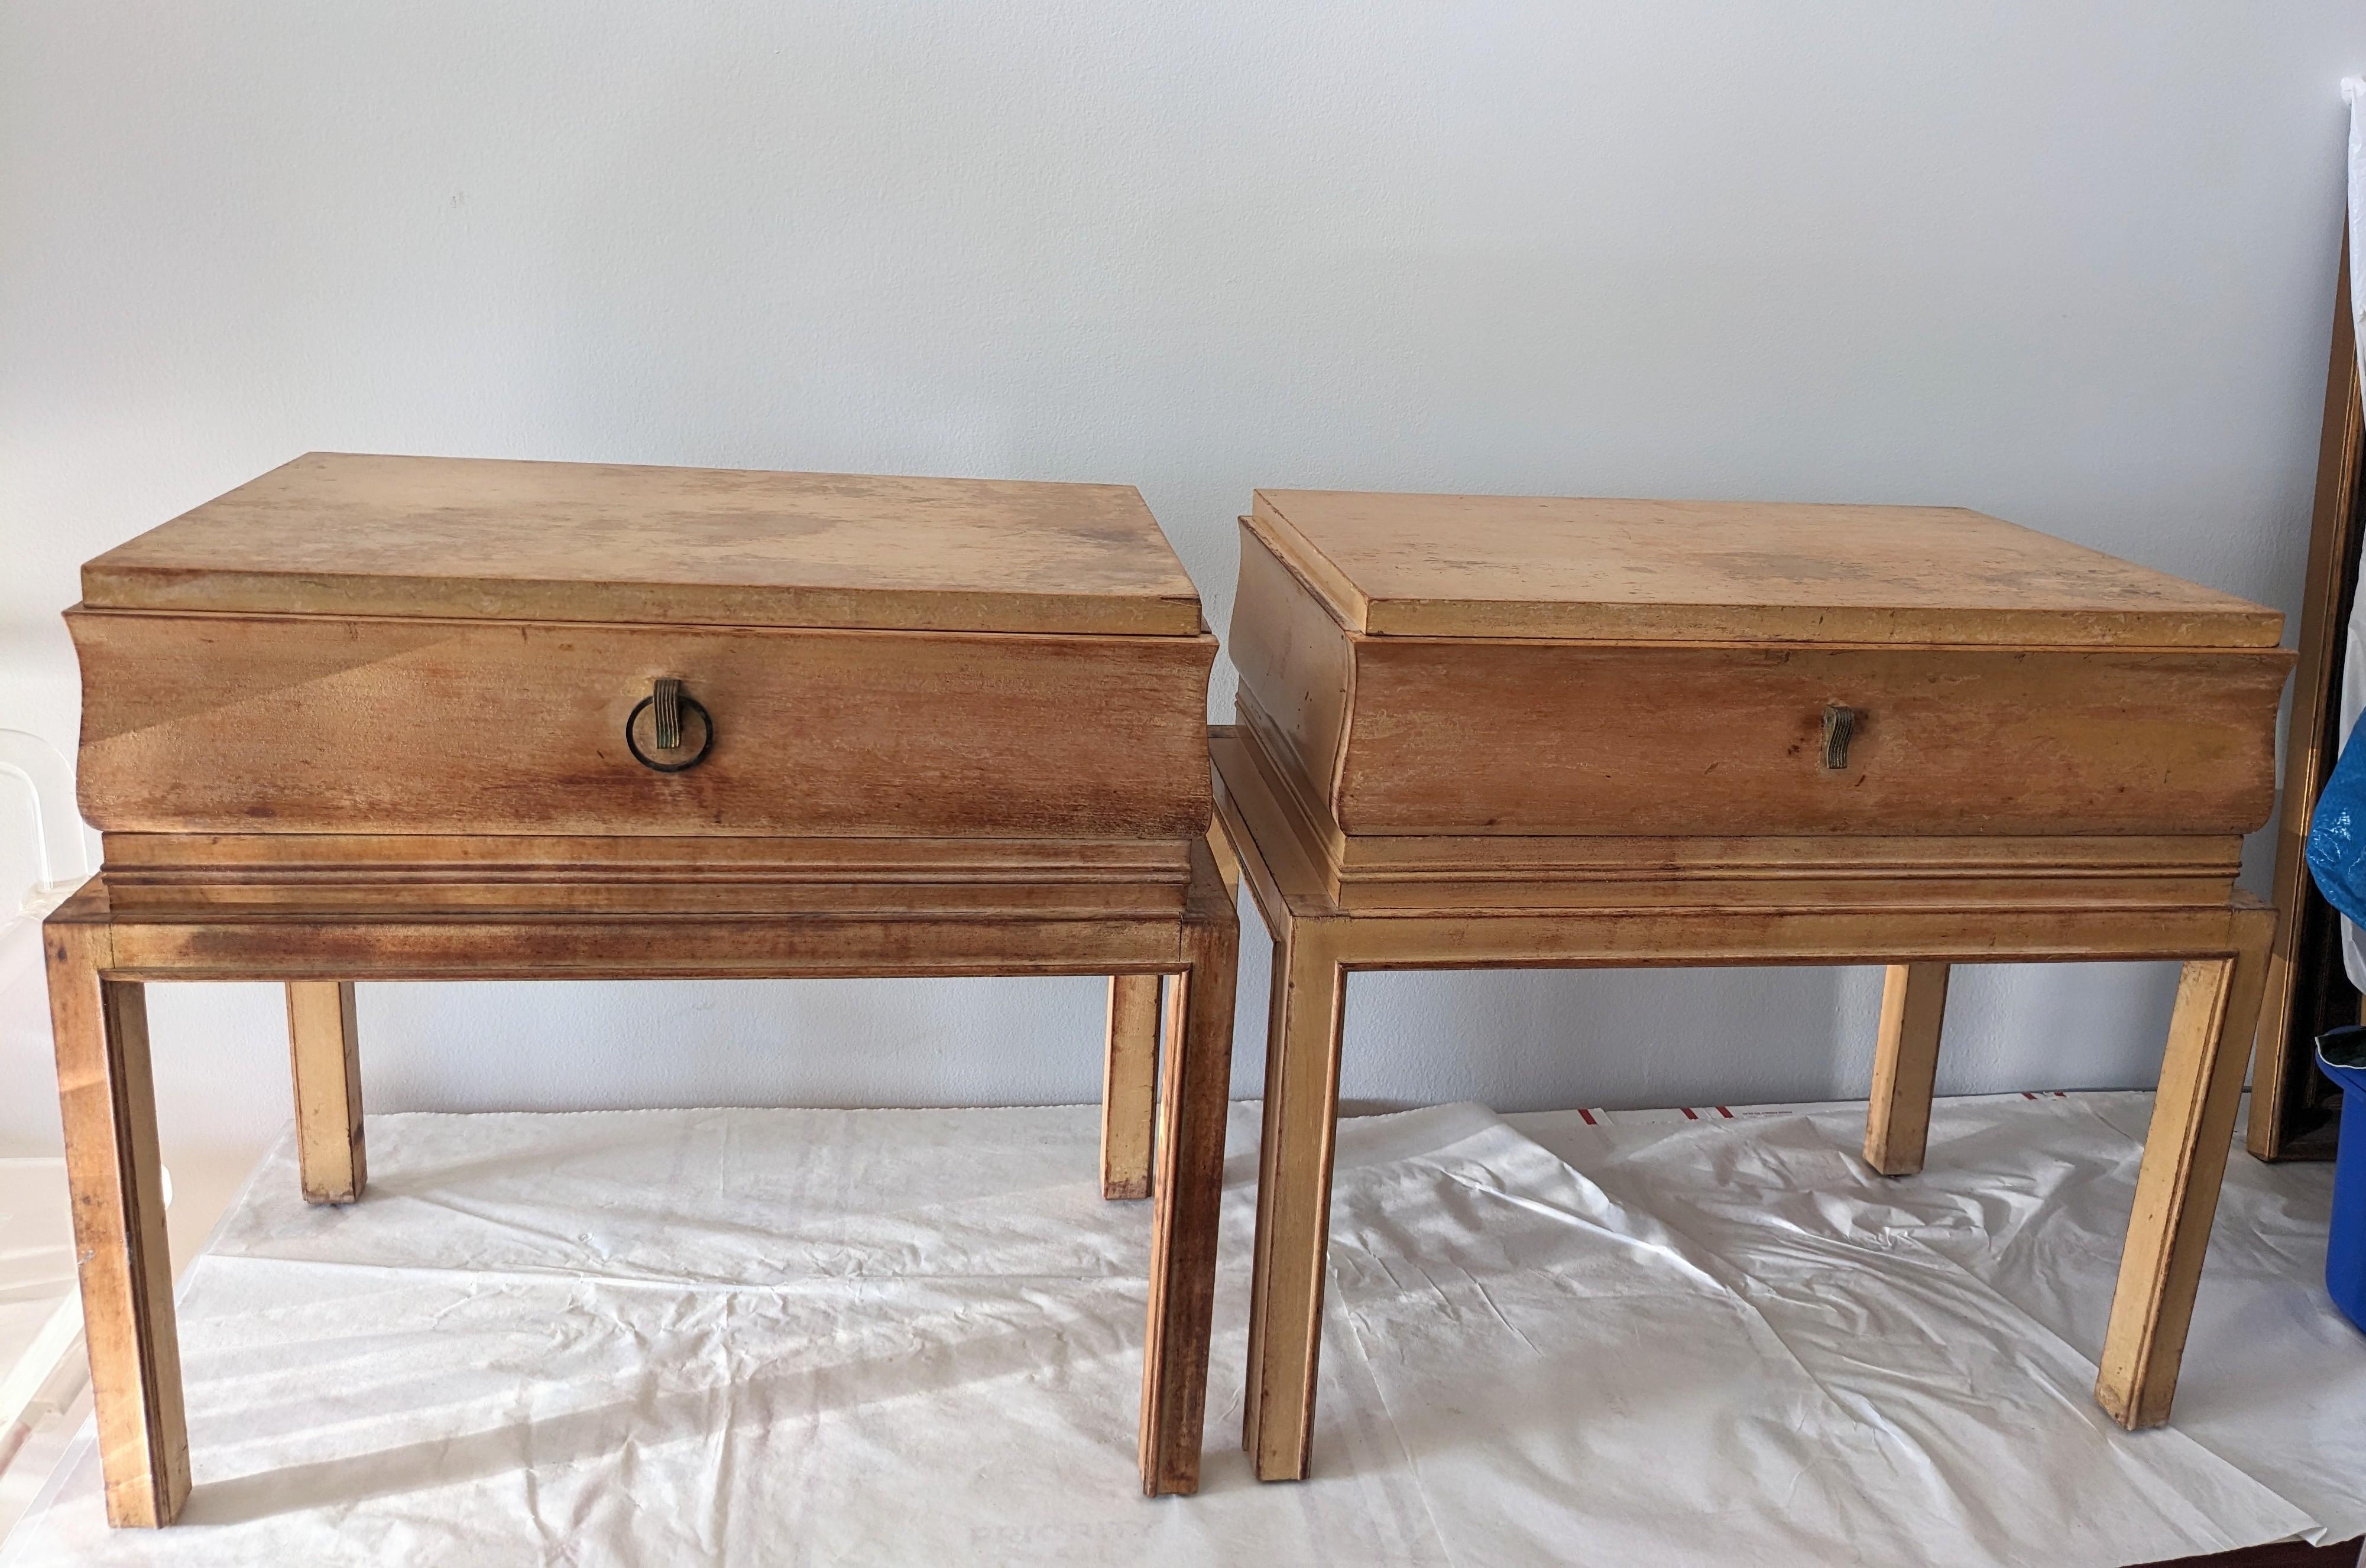 Pair of Elegant Art Deco Tommi Parzinger End/Night Tables for Charak Modern. Amazing lines instantly recognizable as Parzinger in light wood with brass accents. Slightly Asian overtones in this sleek stepped design from the 1940's. One chest is